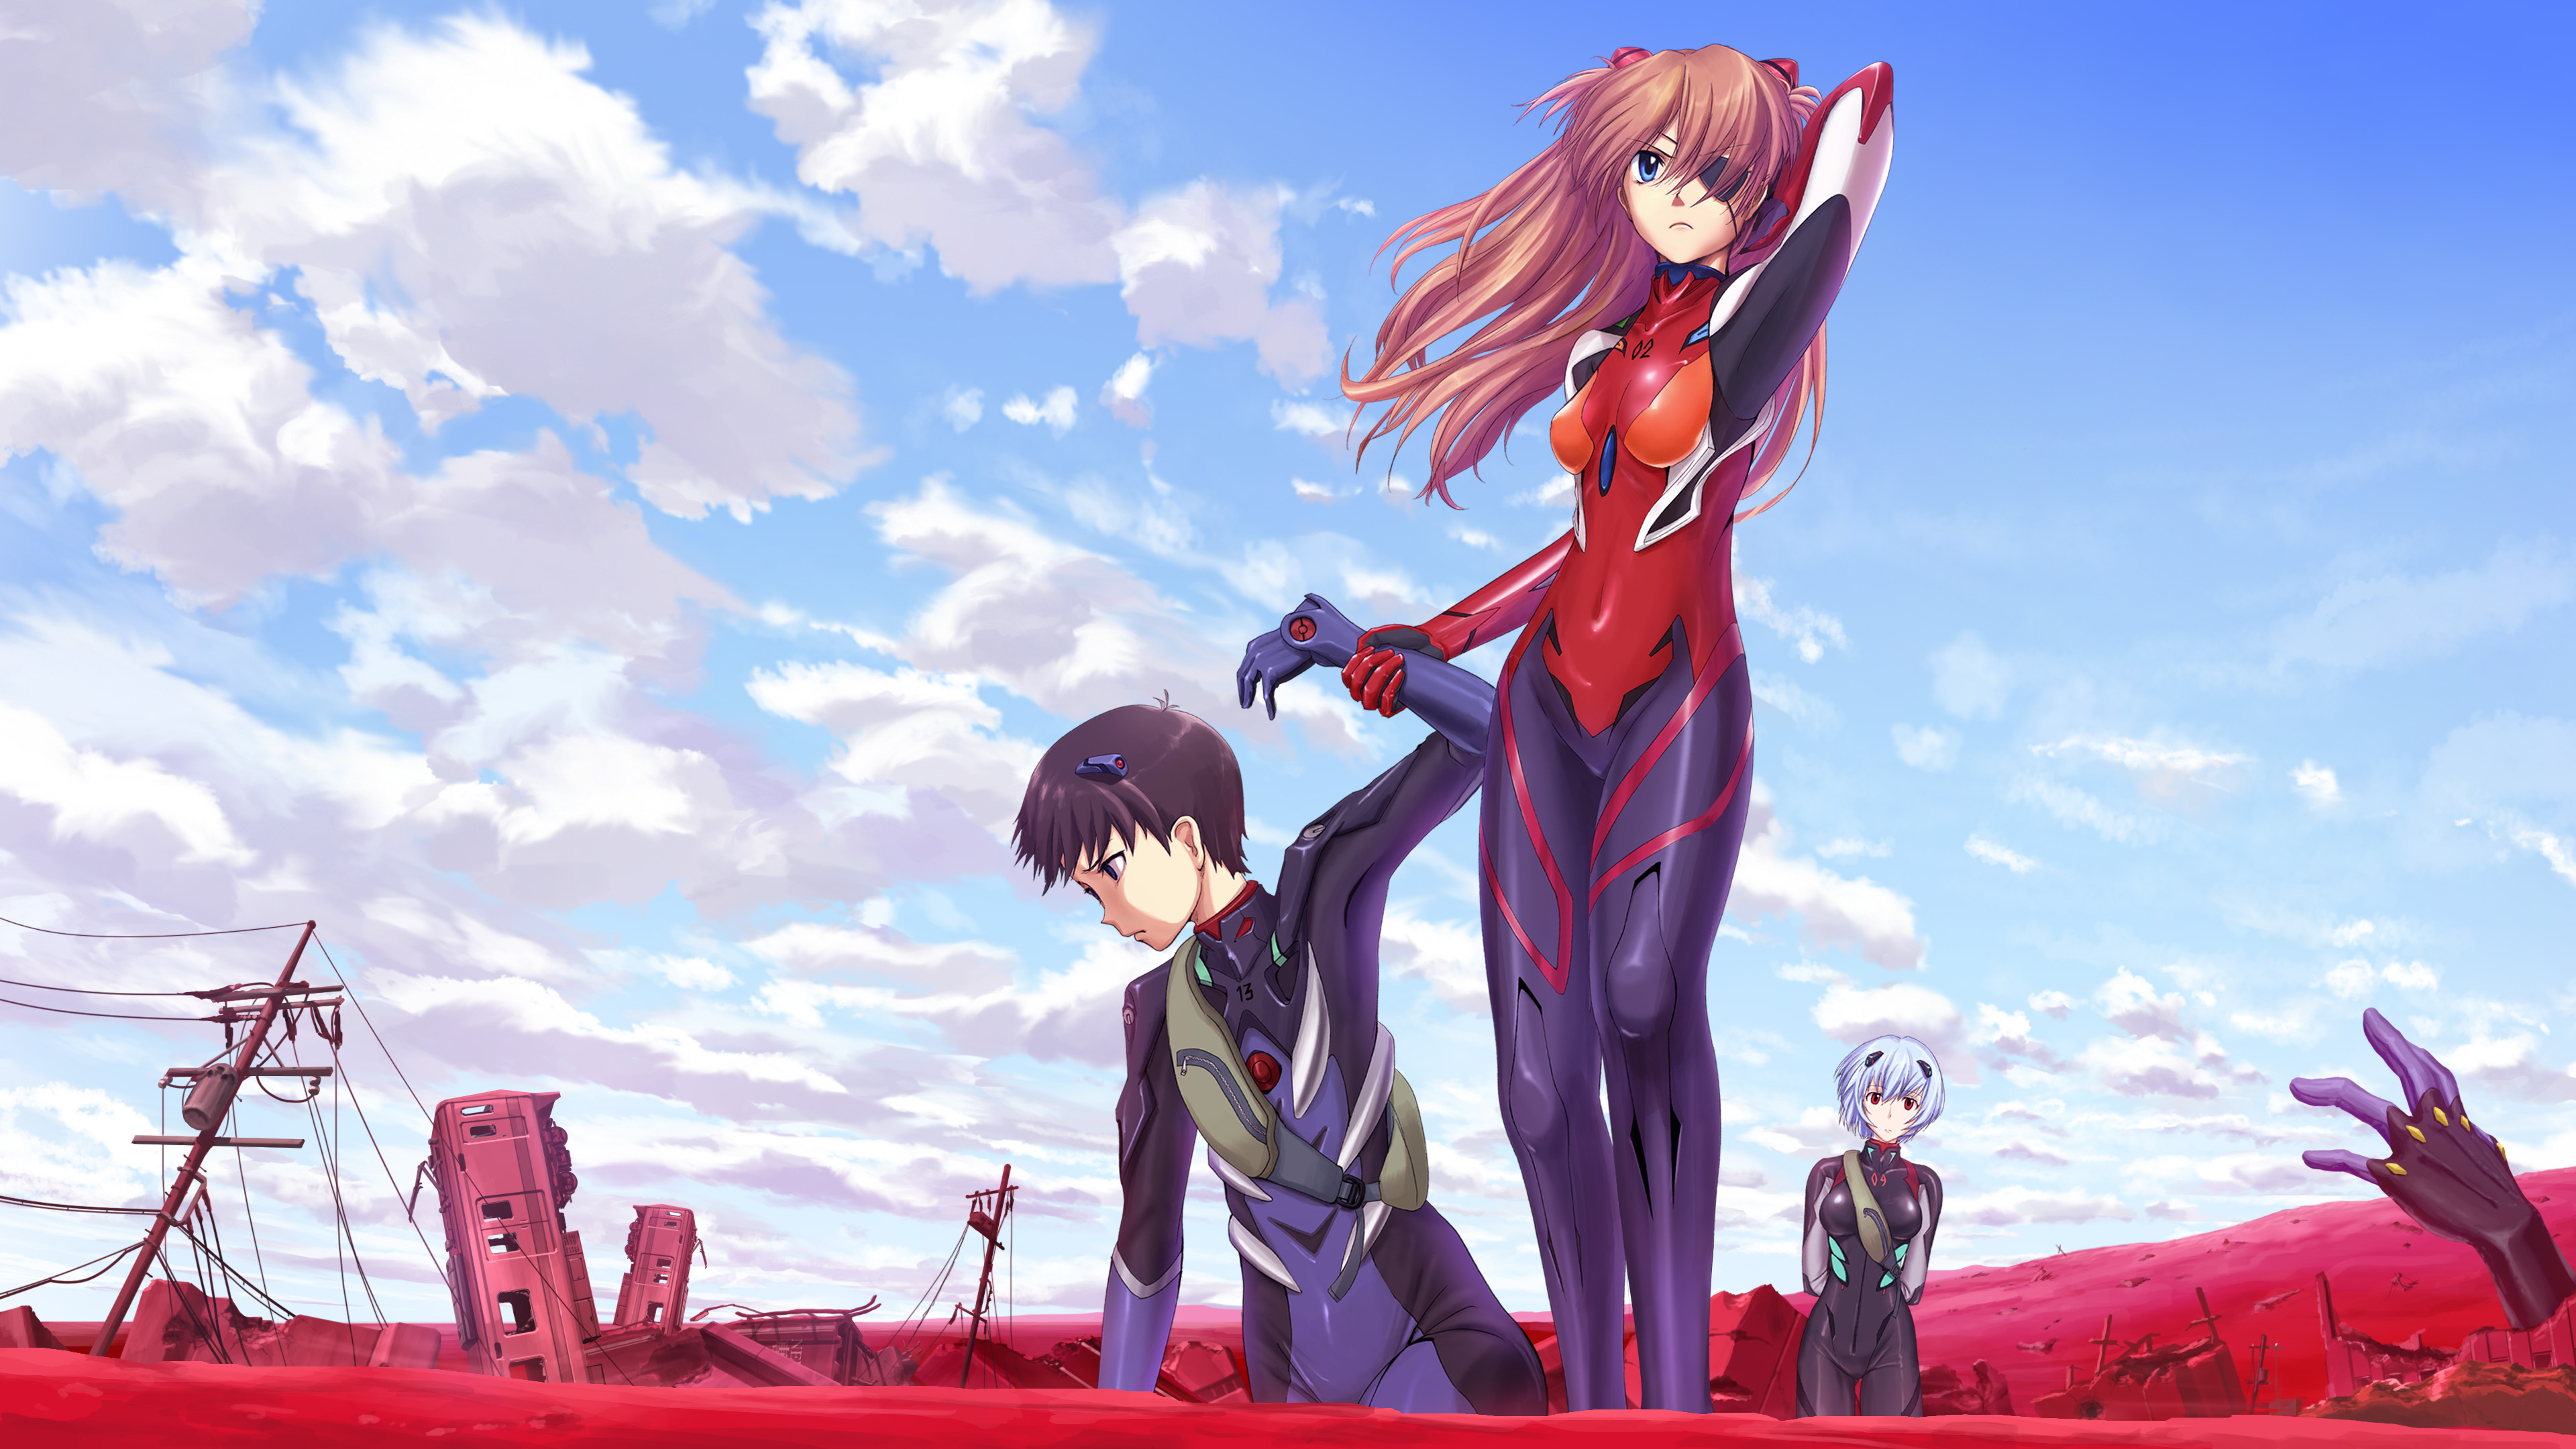 Asuka Windows 98 Wallpaper  Free Download Borrow and Streaming   Internet Archive